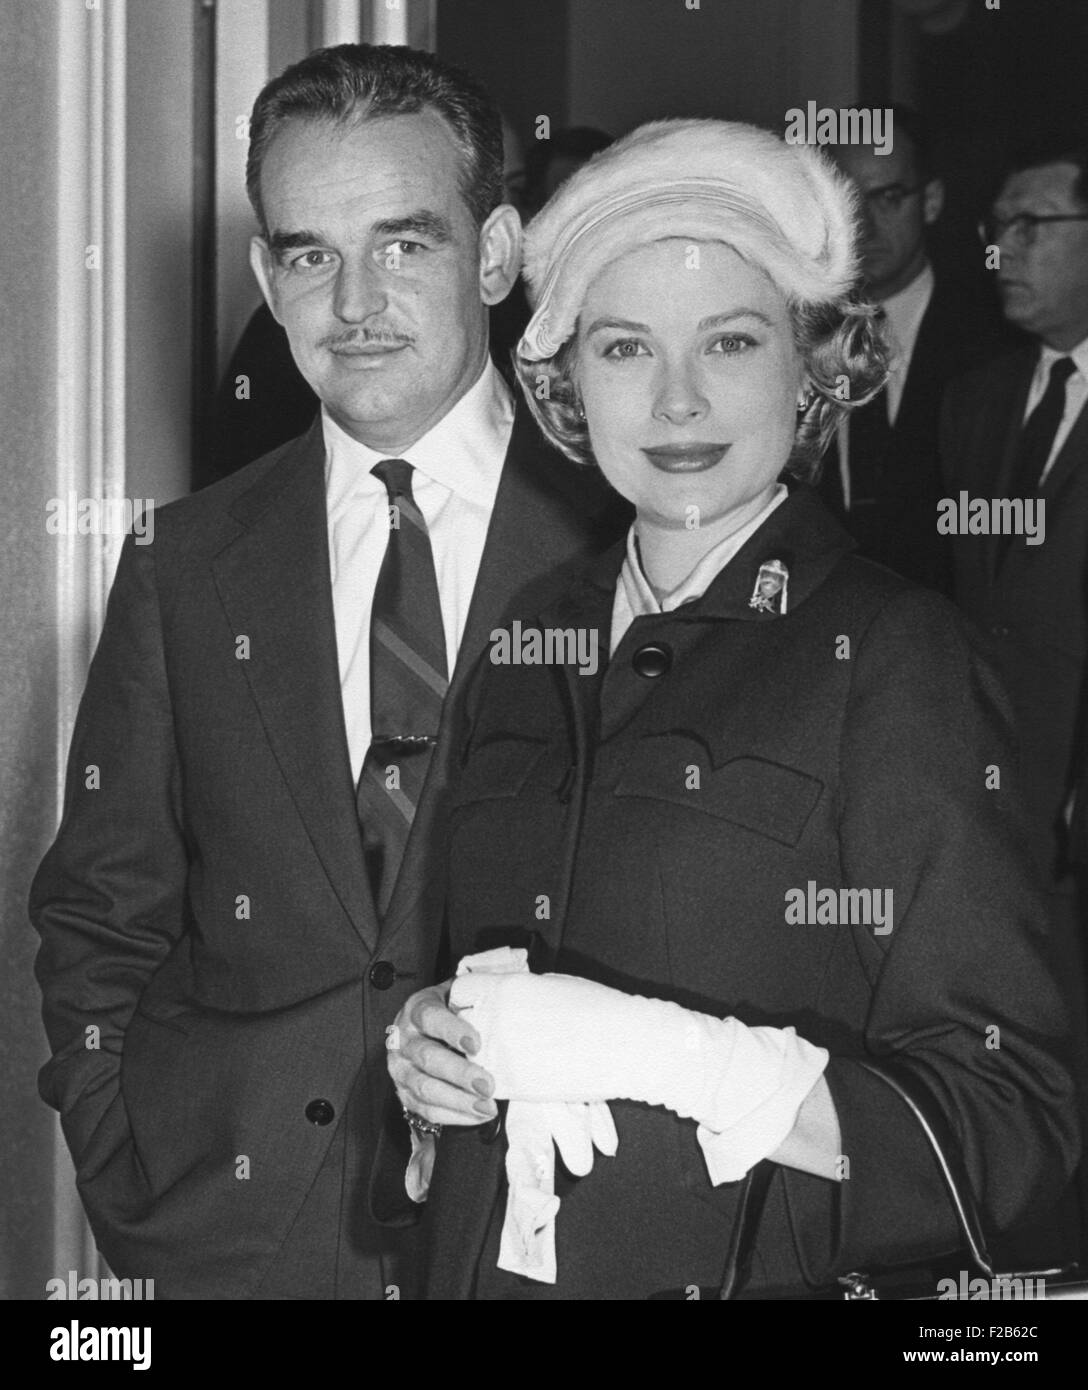 Prince Rainer and Princess Grace at the White House during their visit to President Eisenhower. Oct. 11, 1956. - (BSLOC 2014 16 166) Stock Photo